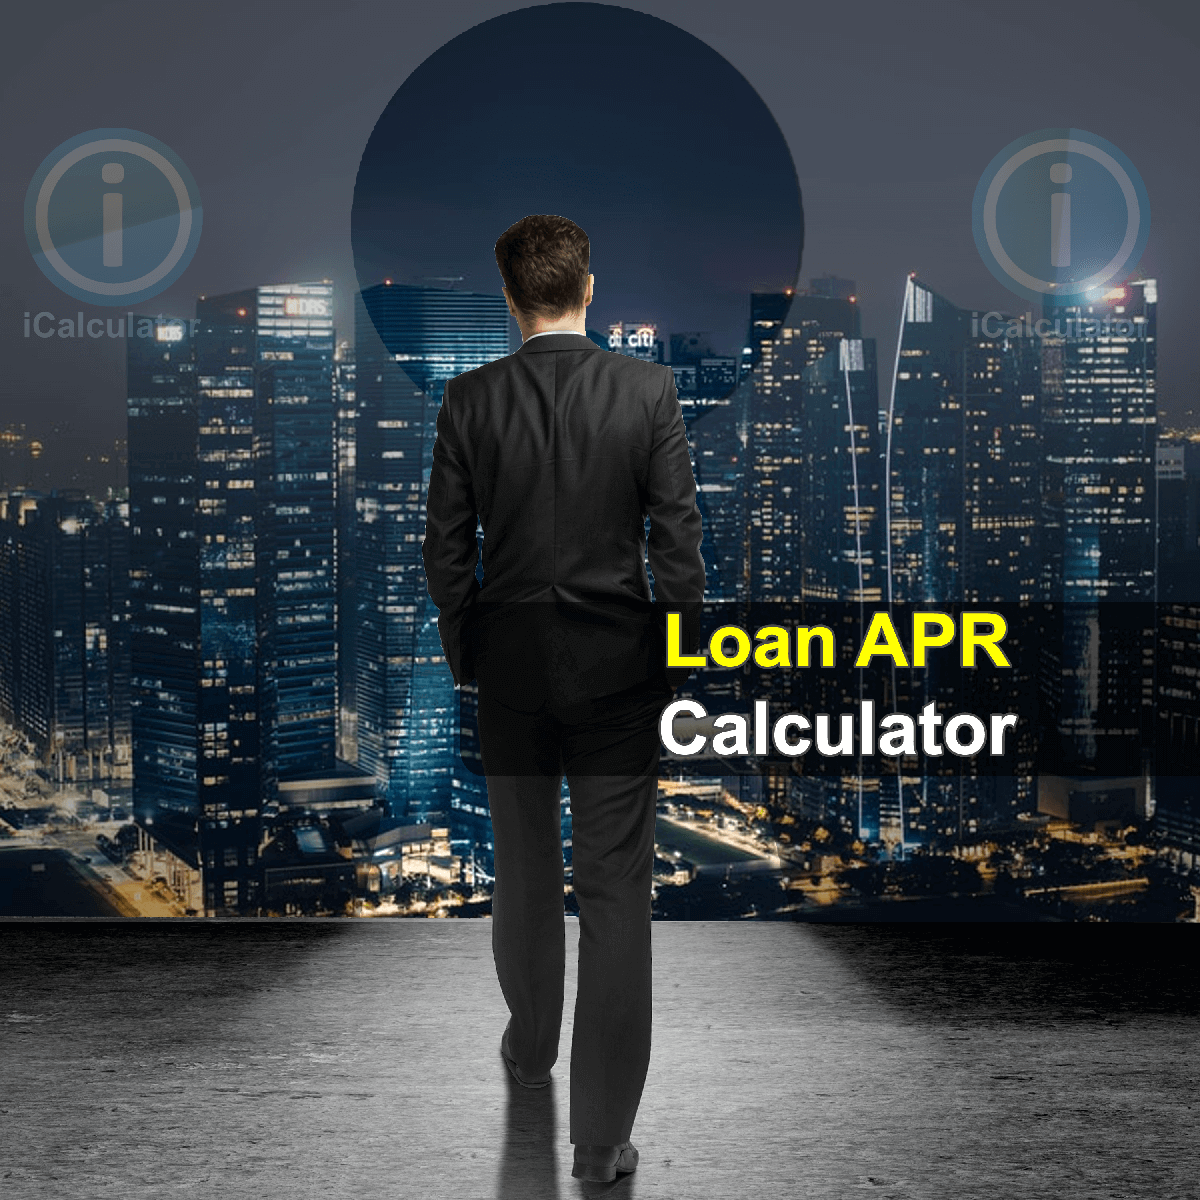 APR Simple Interest Loan Calculator. This image provides details of how to calculate APR Interest on a Loan using a calculator and notepad. By using the APR Simple Interest Loan formula, the APR Simple Interest Loan Calculator provides a true calculation of the interest paid on a loan.